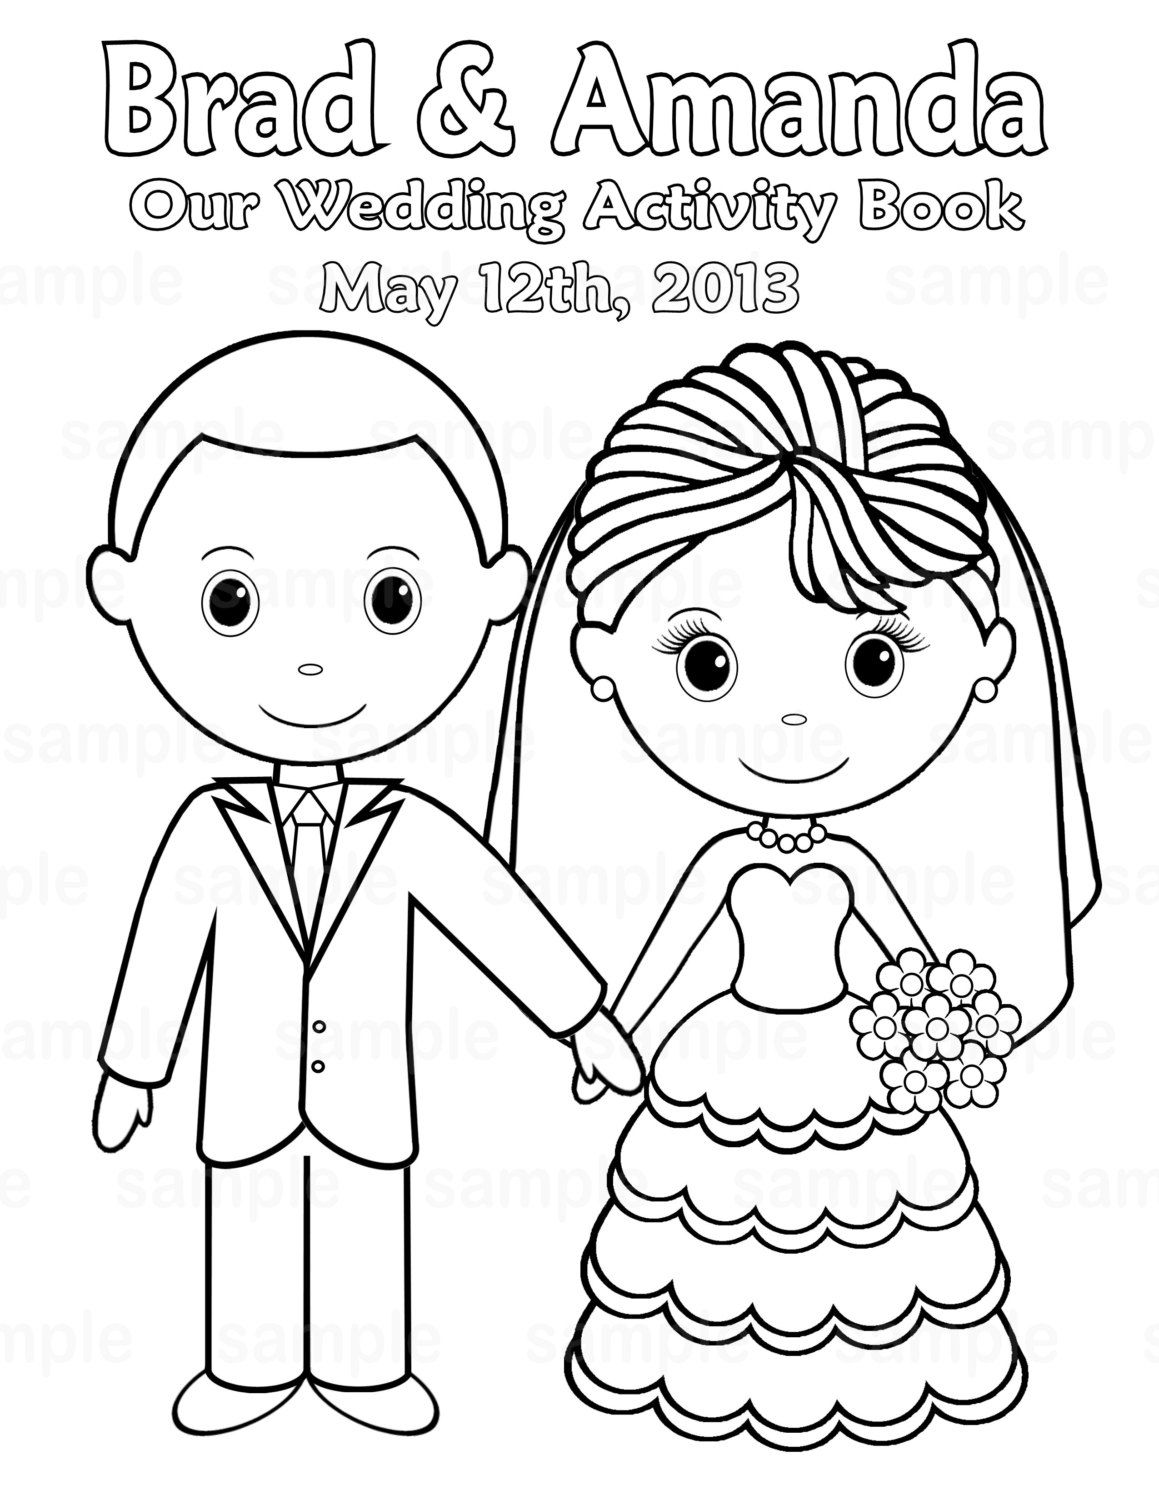 Wedding Coloring Book Pages | Free Coloring Pages on Masivy World